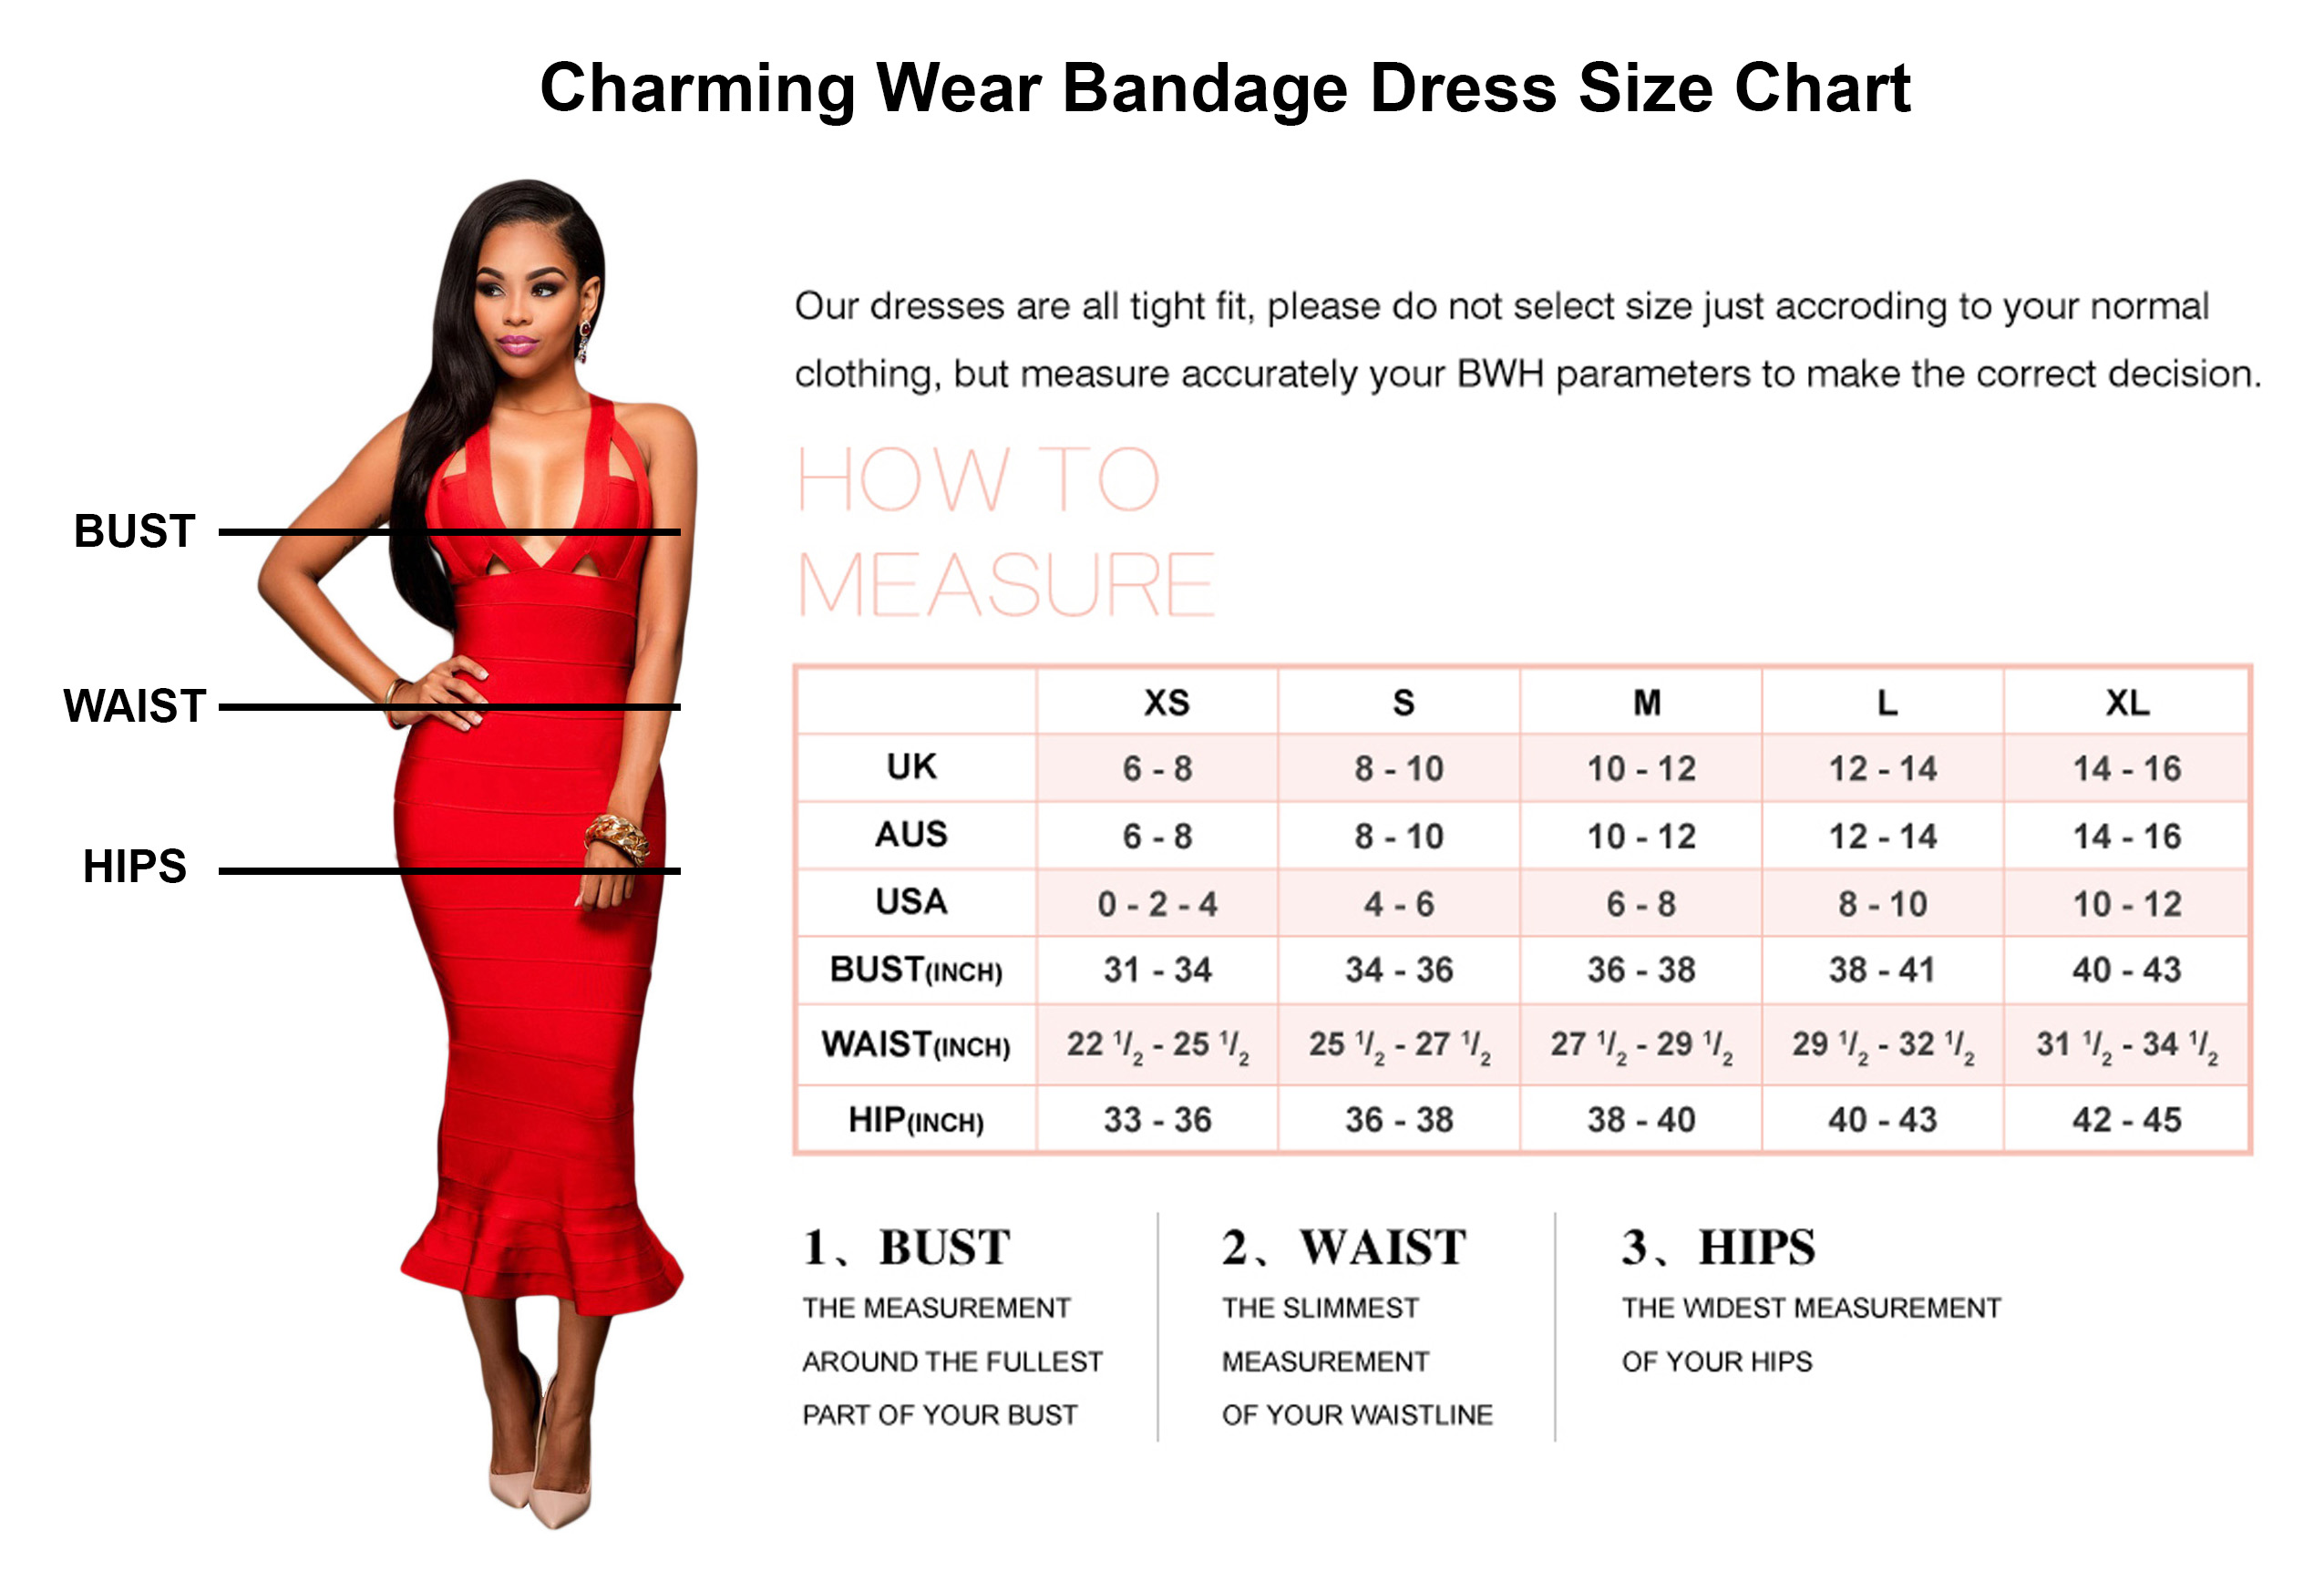 Bust Size Chart For Dresses